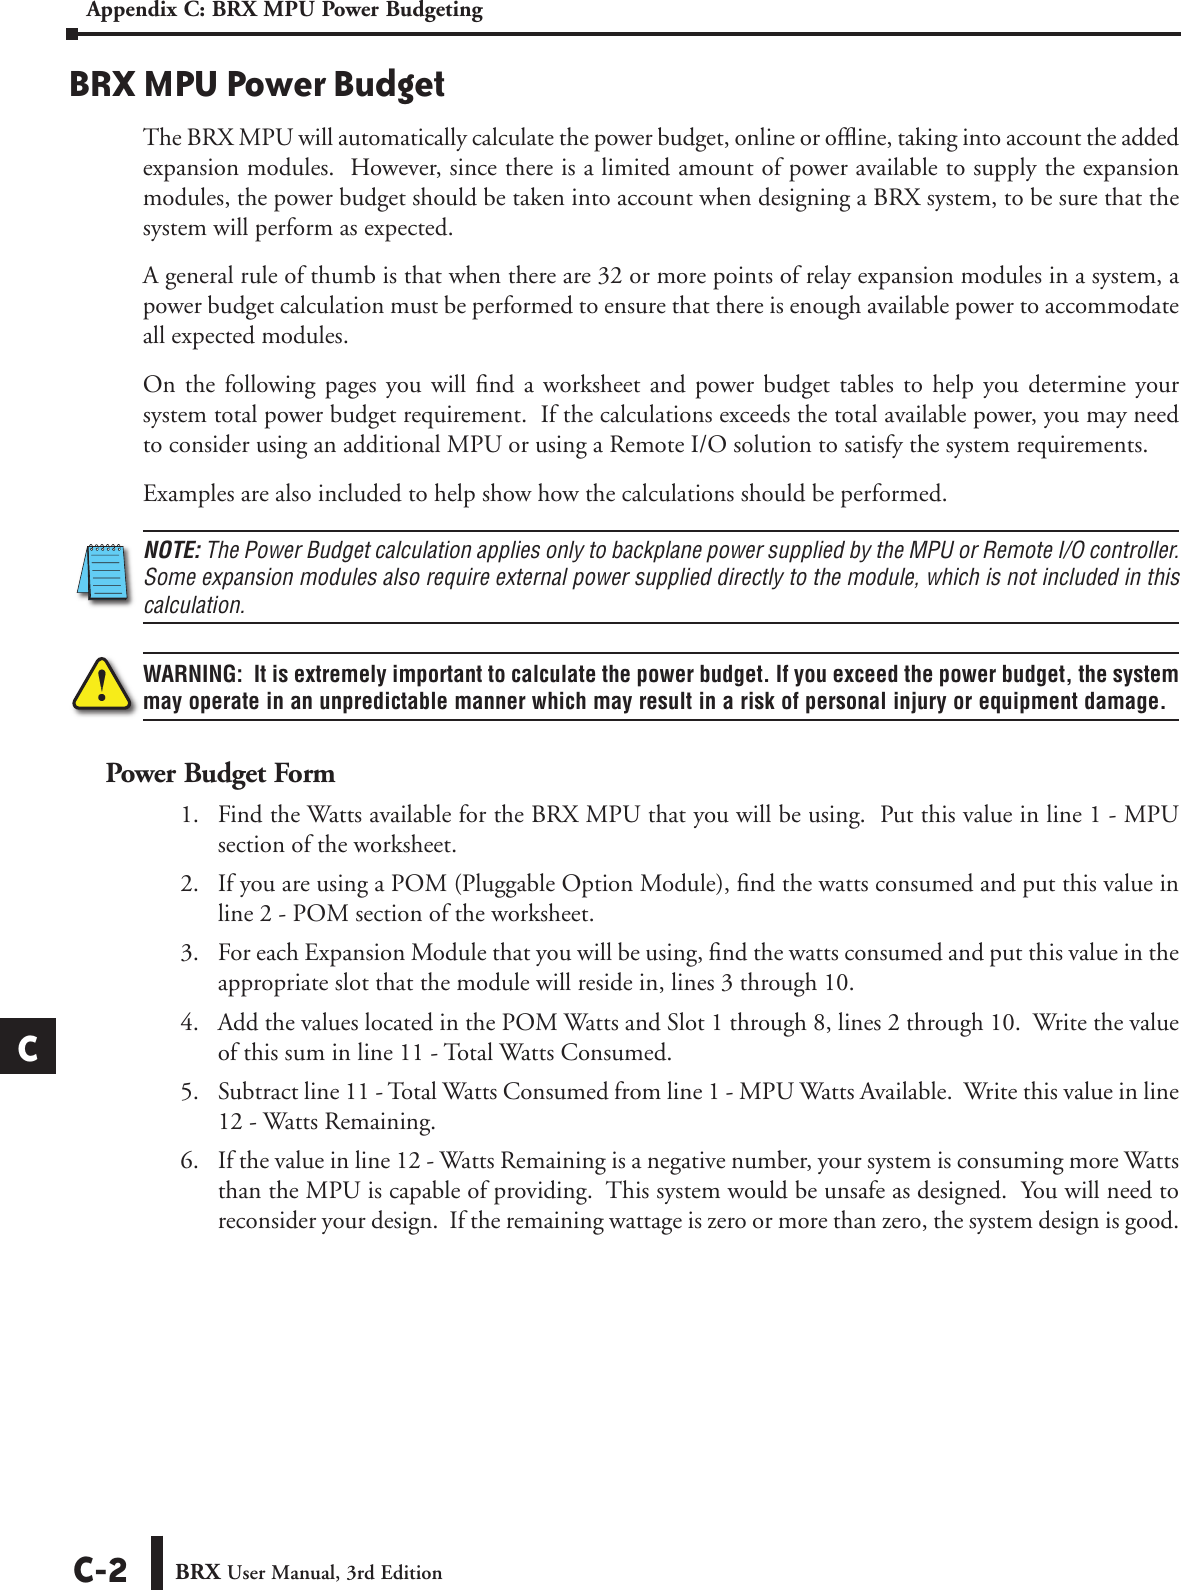 Page 2 of 8 - BRX User Manual, 3rd Edition Appendix C Appxc